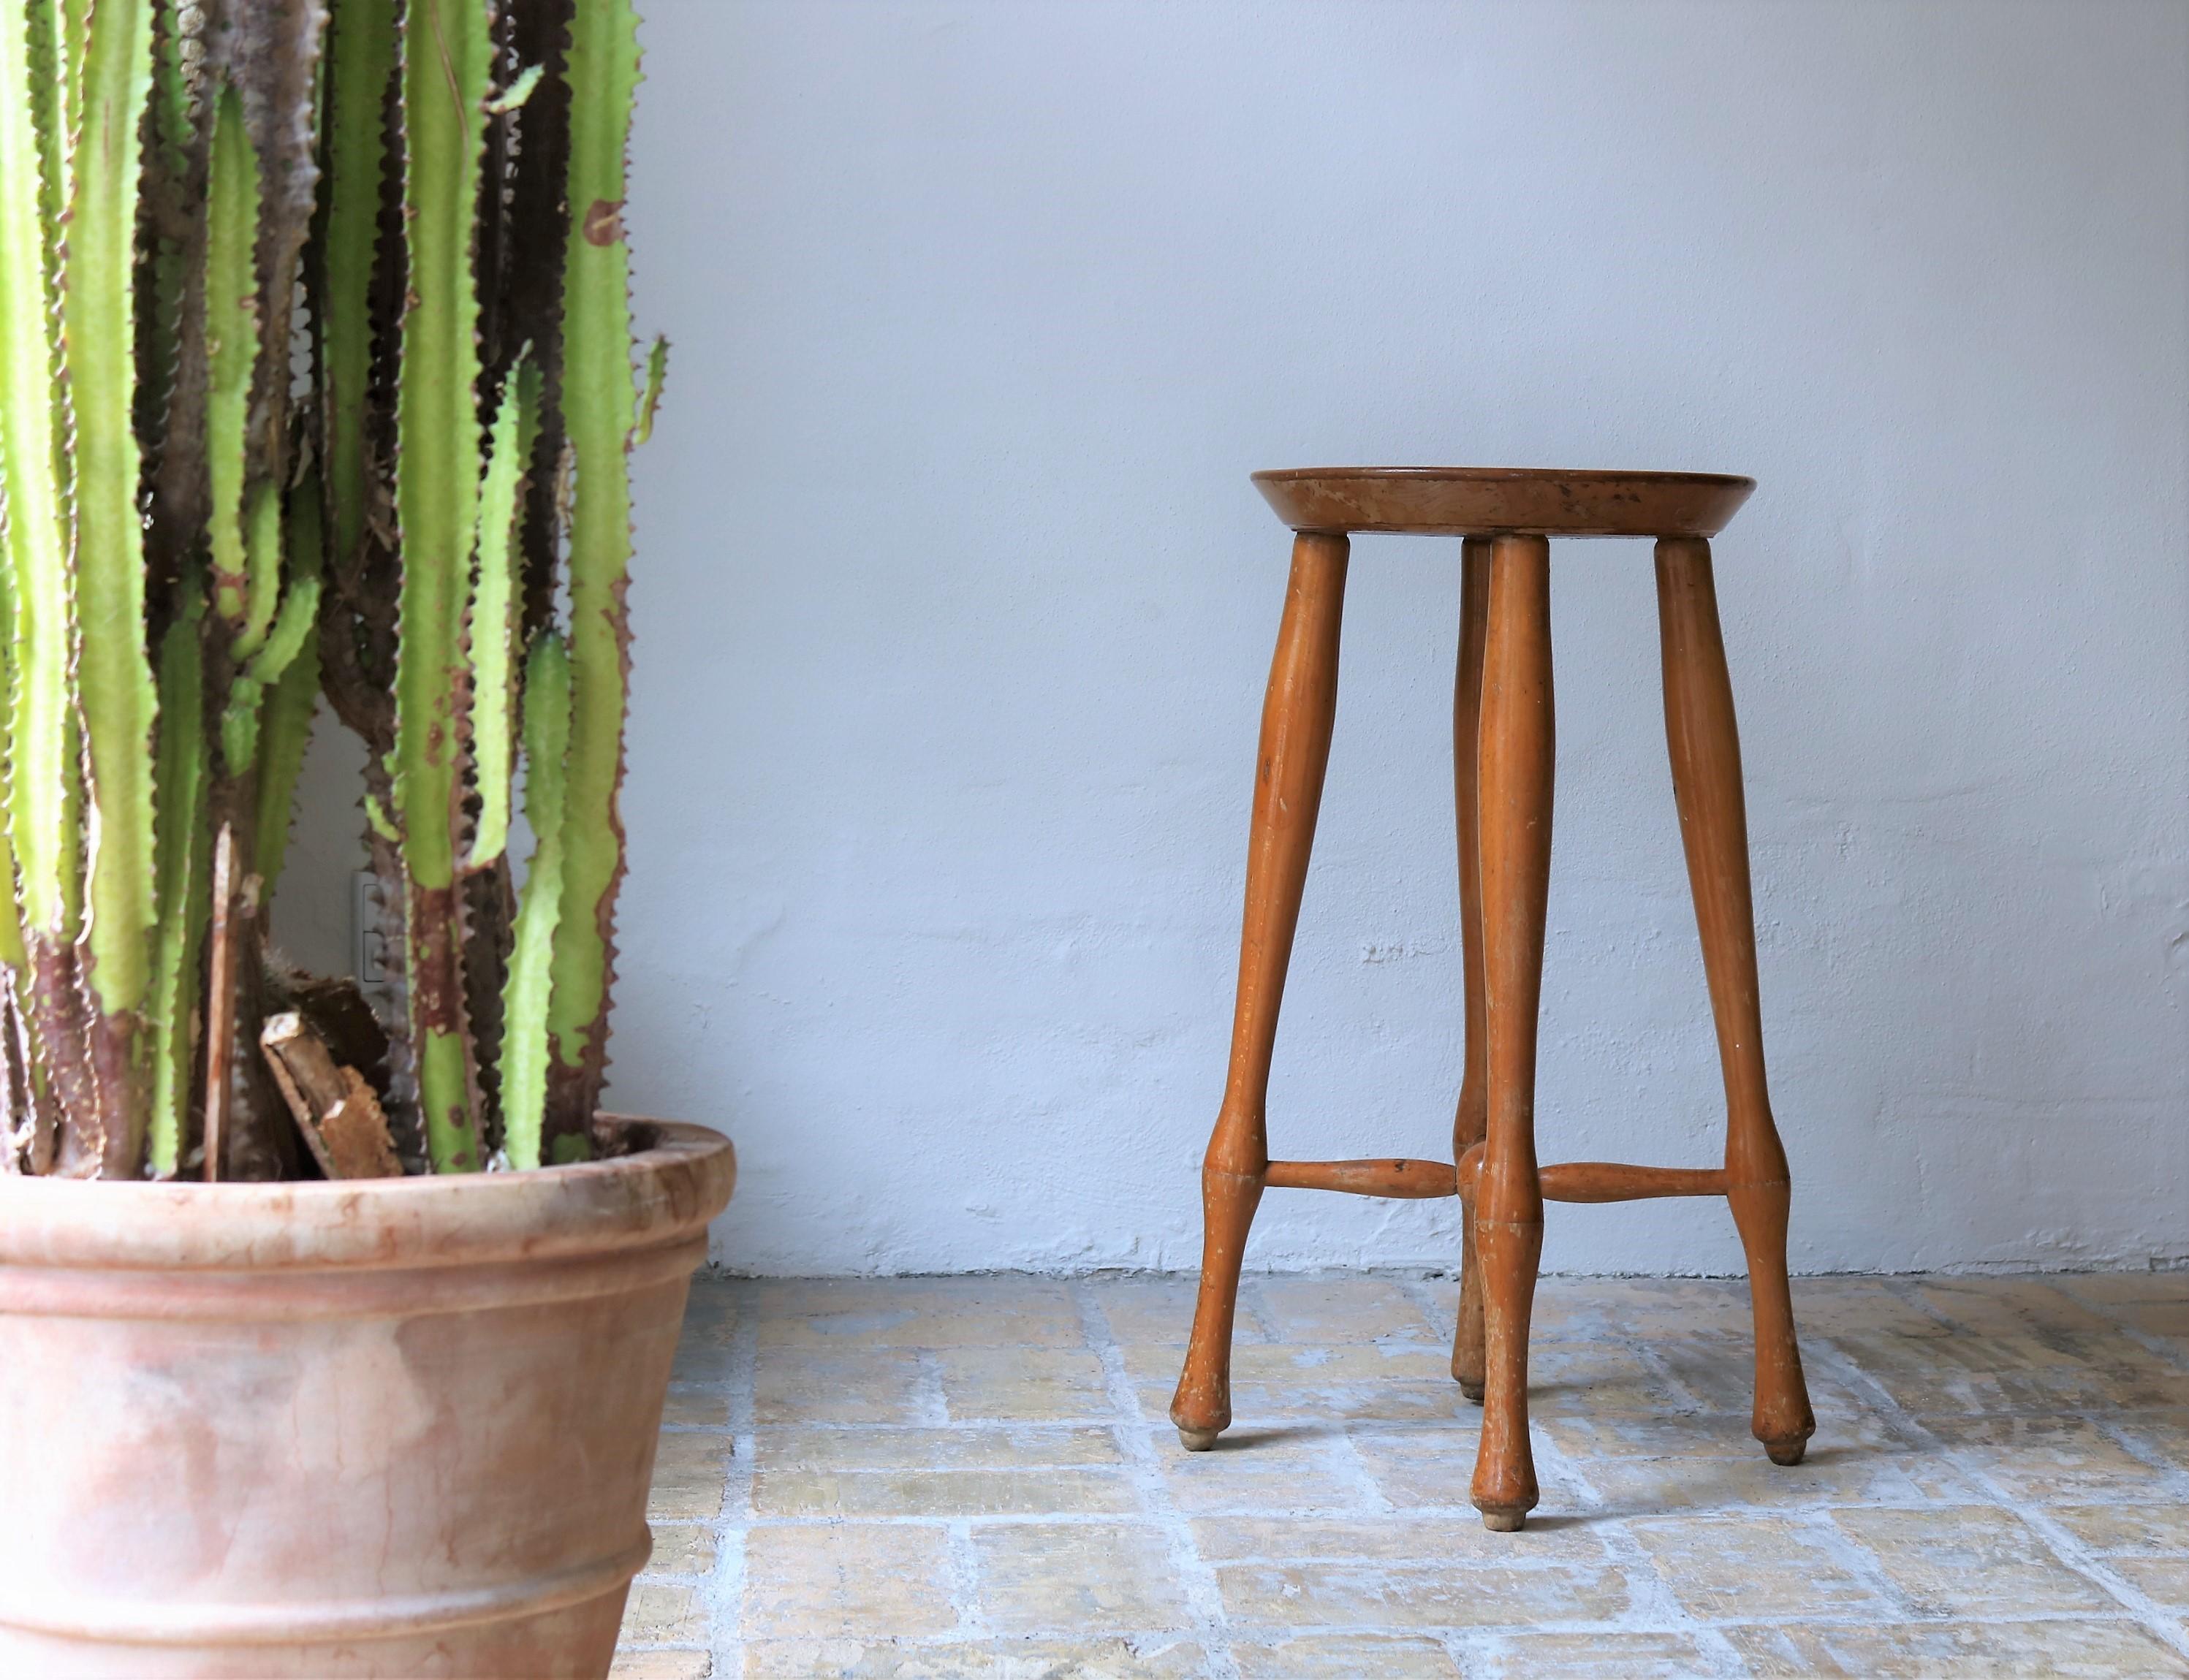 20th Century Sculptural Stool in Patinated Beech by Danish Cabinetmaker in Modern Style